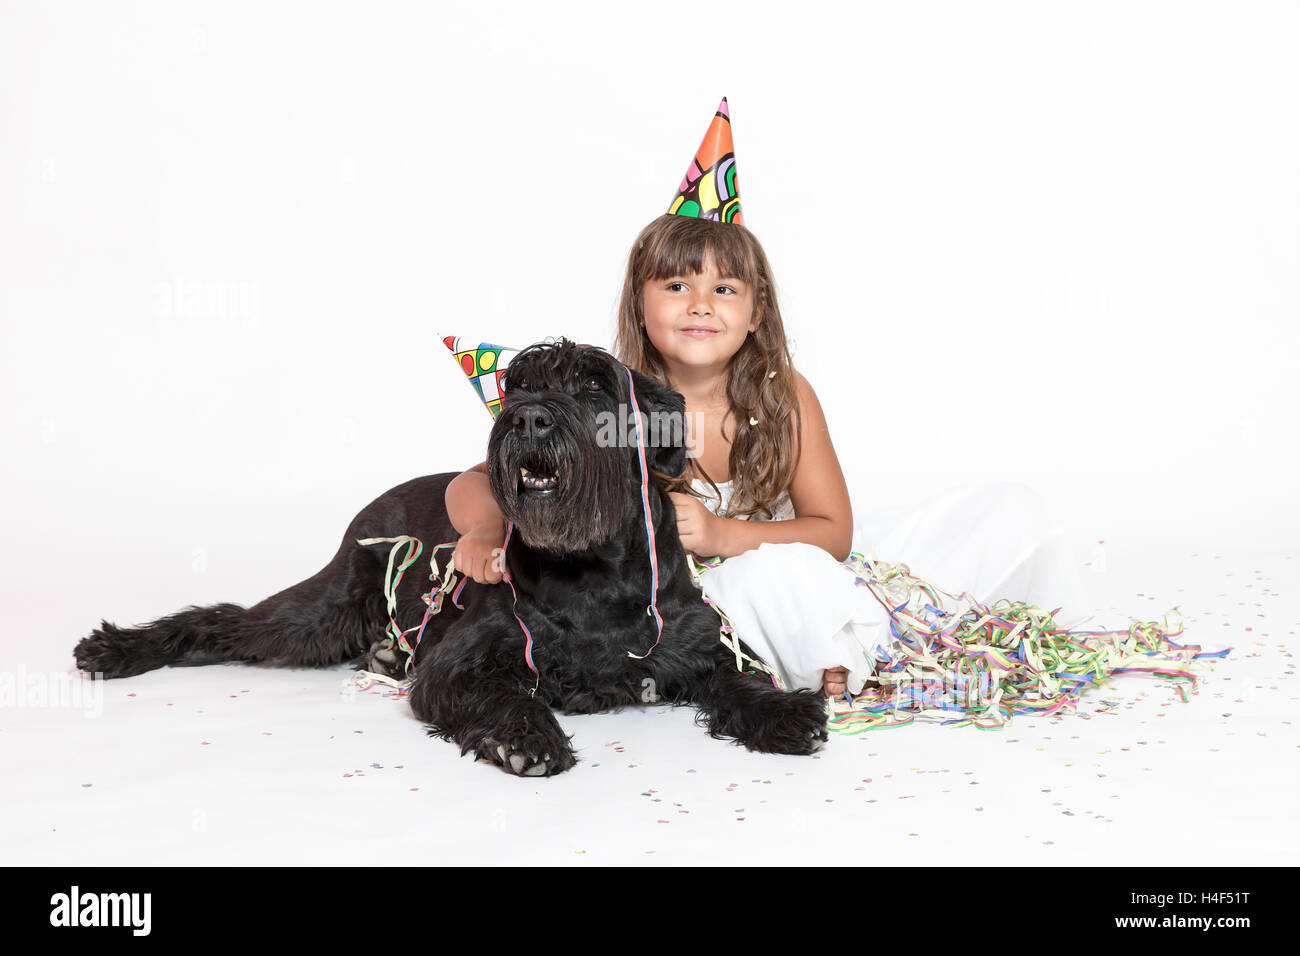 Cute smiling tanned little girl in white dress with paper hat on her head is embracing Giant Black Schnauzer dog Stock Photo